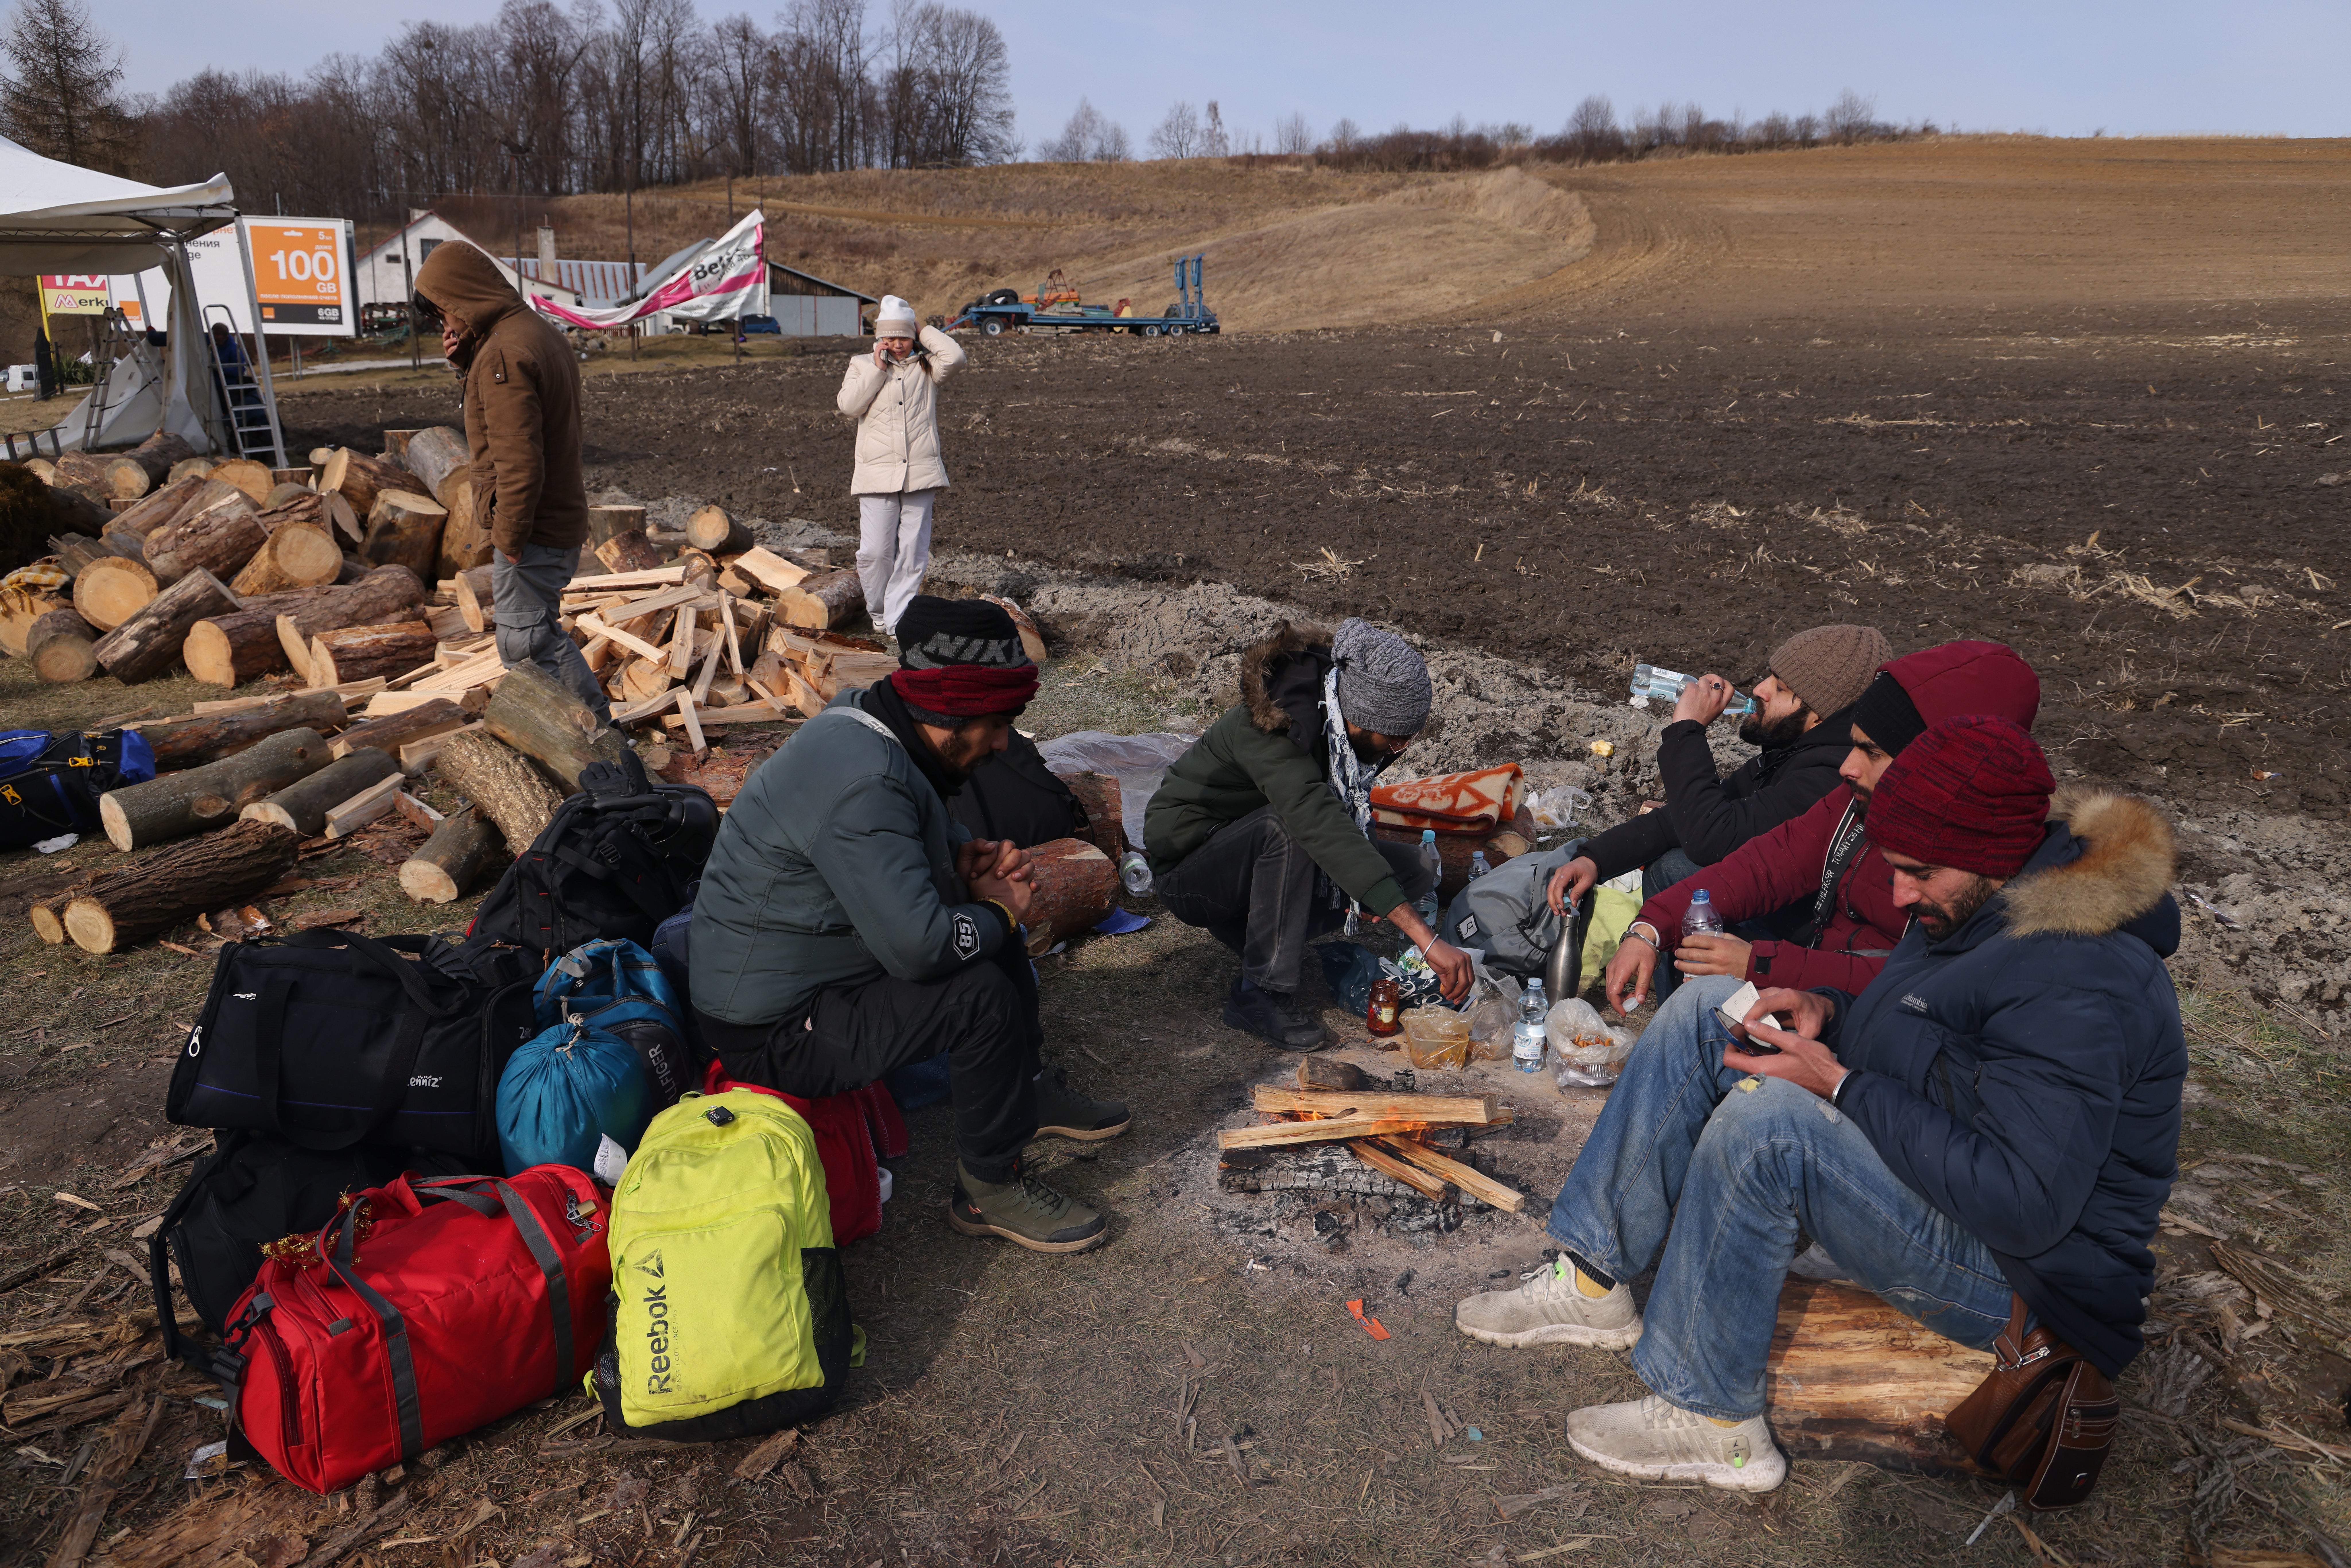 Indian and Nepalese students who had been studying at Poltava University of Economics and Trade in Ukraine prepare food around a campfire after arriving at the border